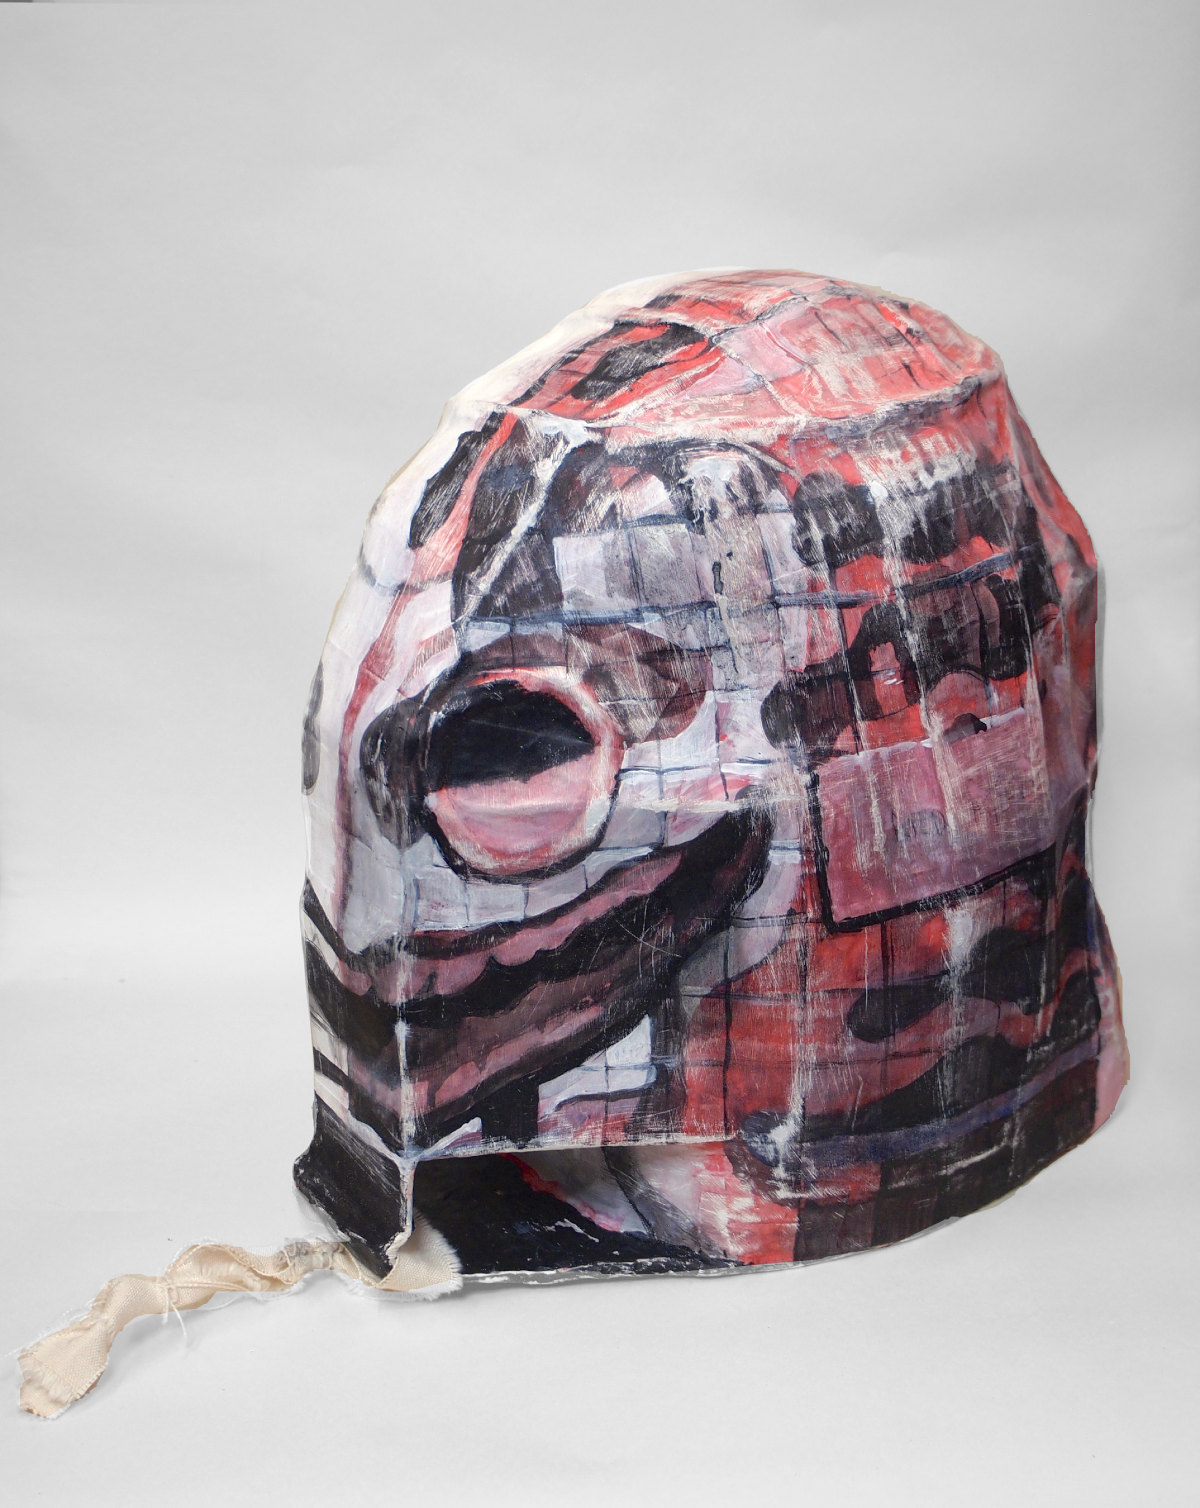 Photo of a papier mâché helmet with eyes and a big smile painted on it (left side)